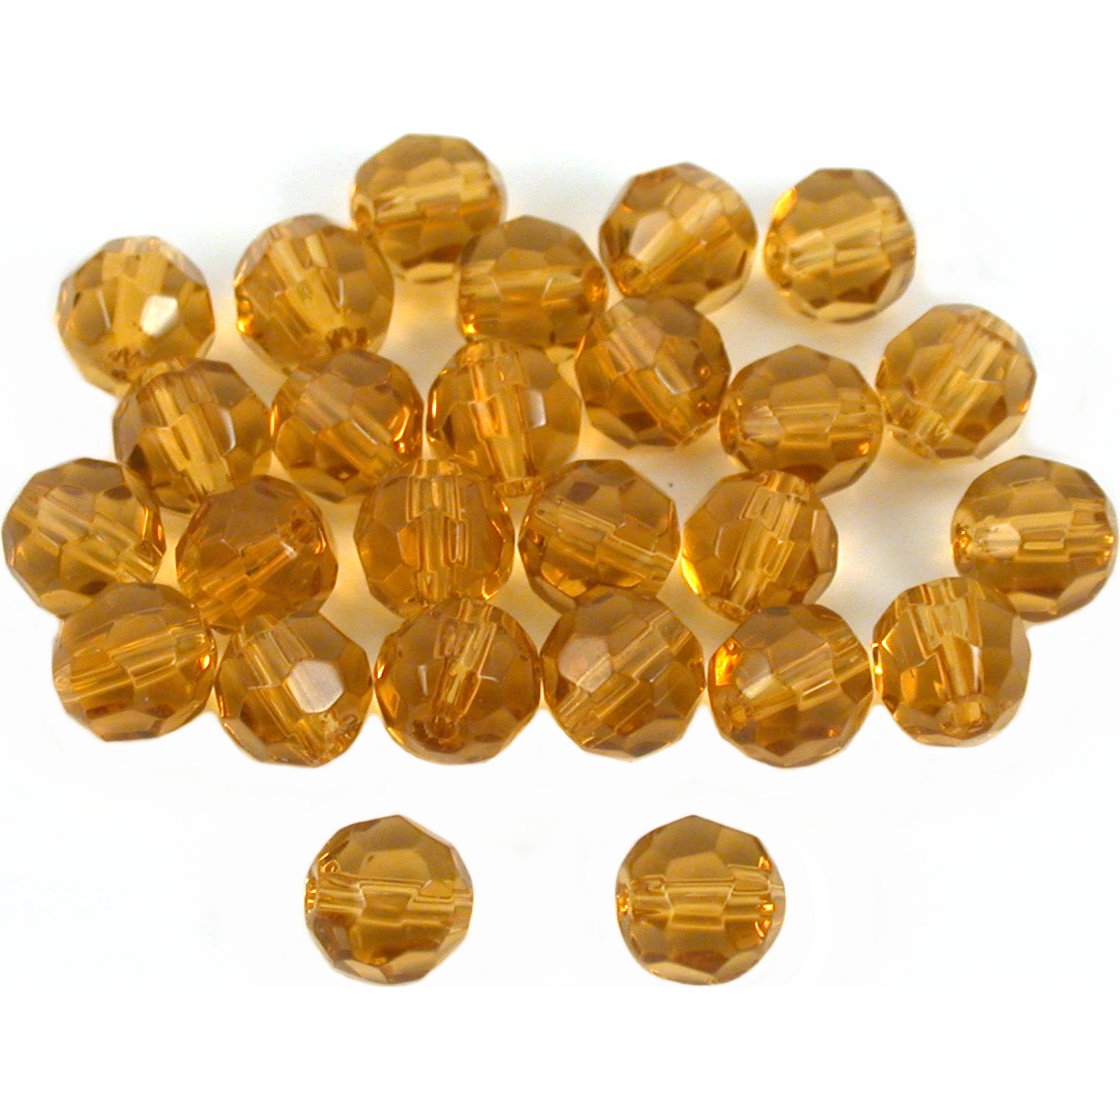 25 Topaz Round FP Faceted Chinese Crystal Beads 6mm